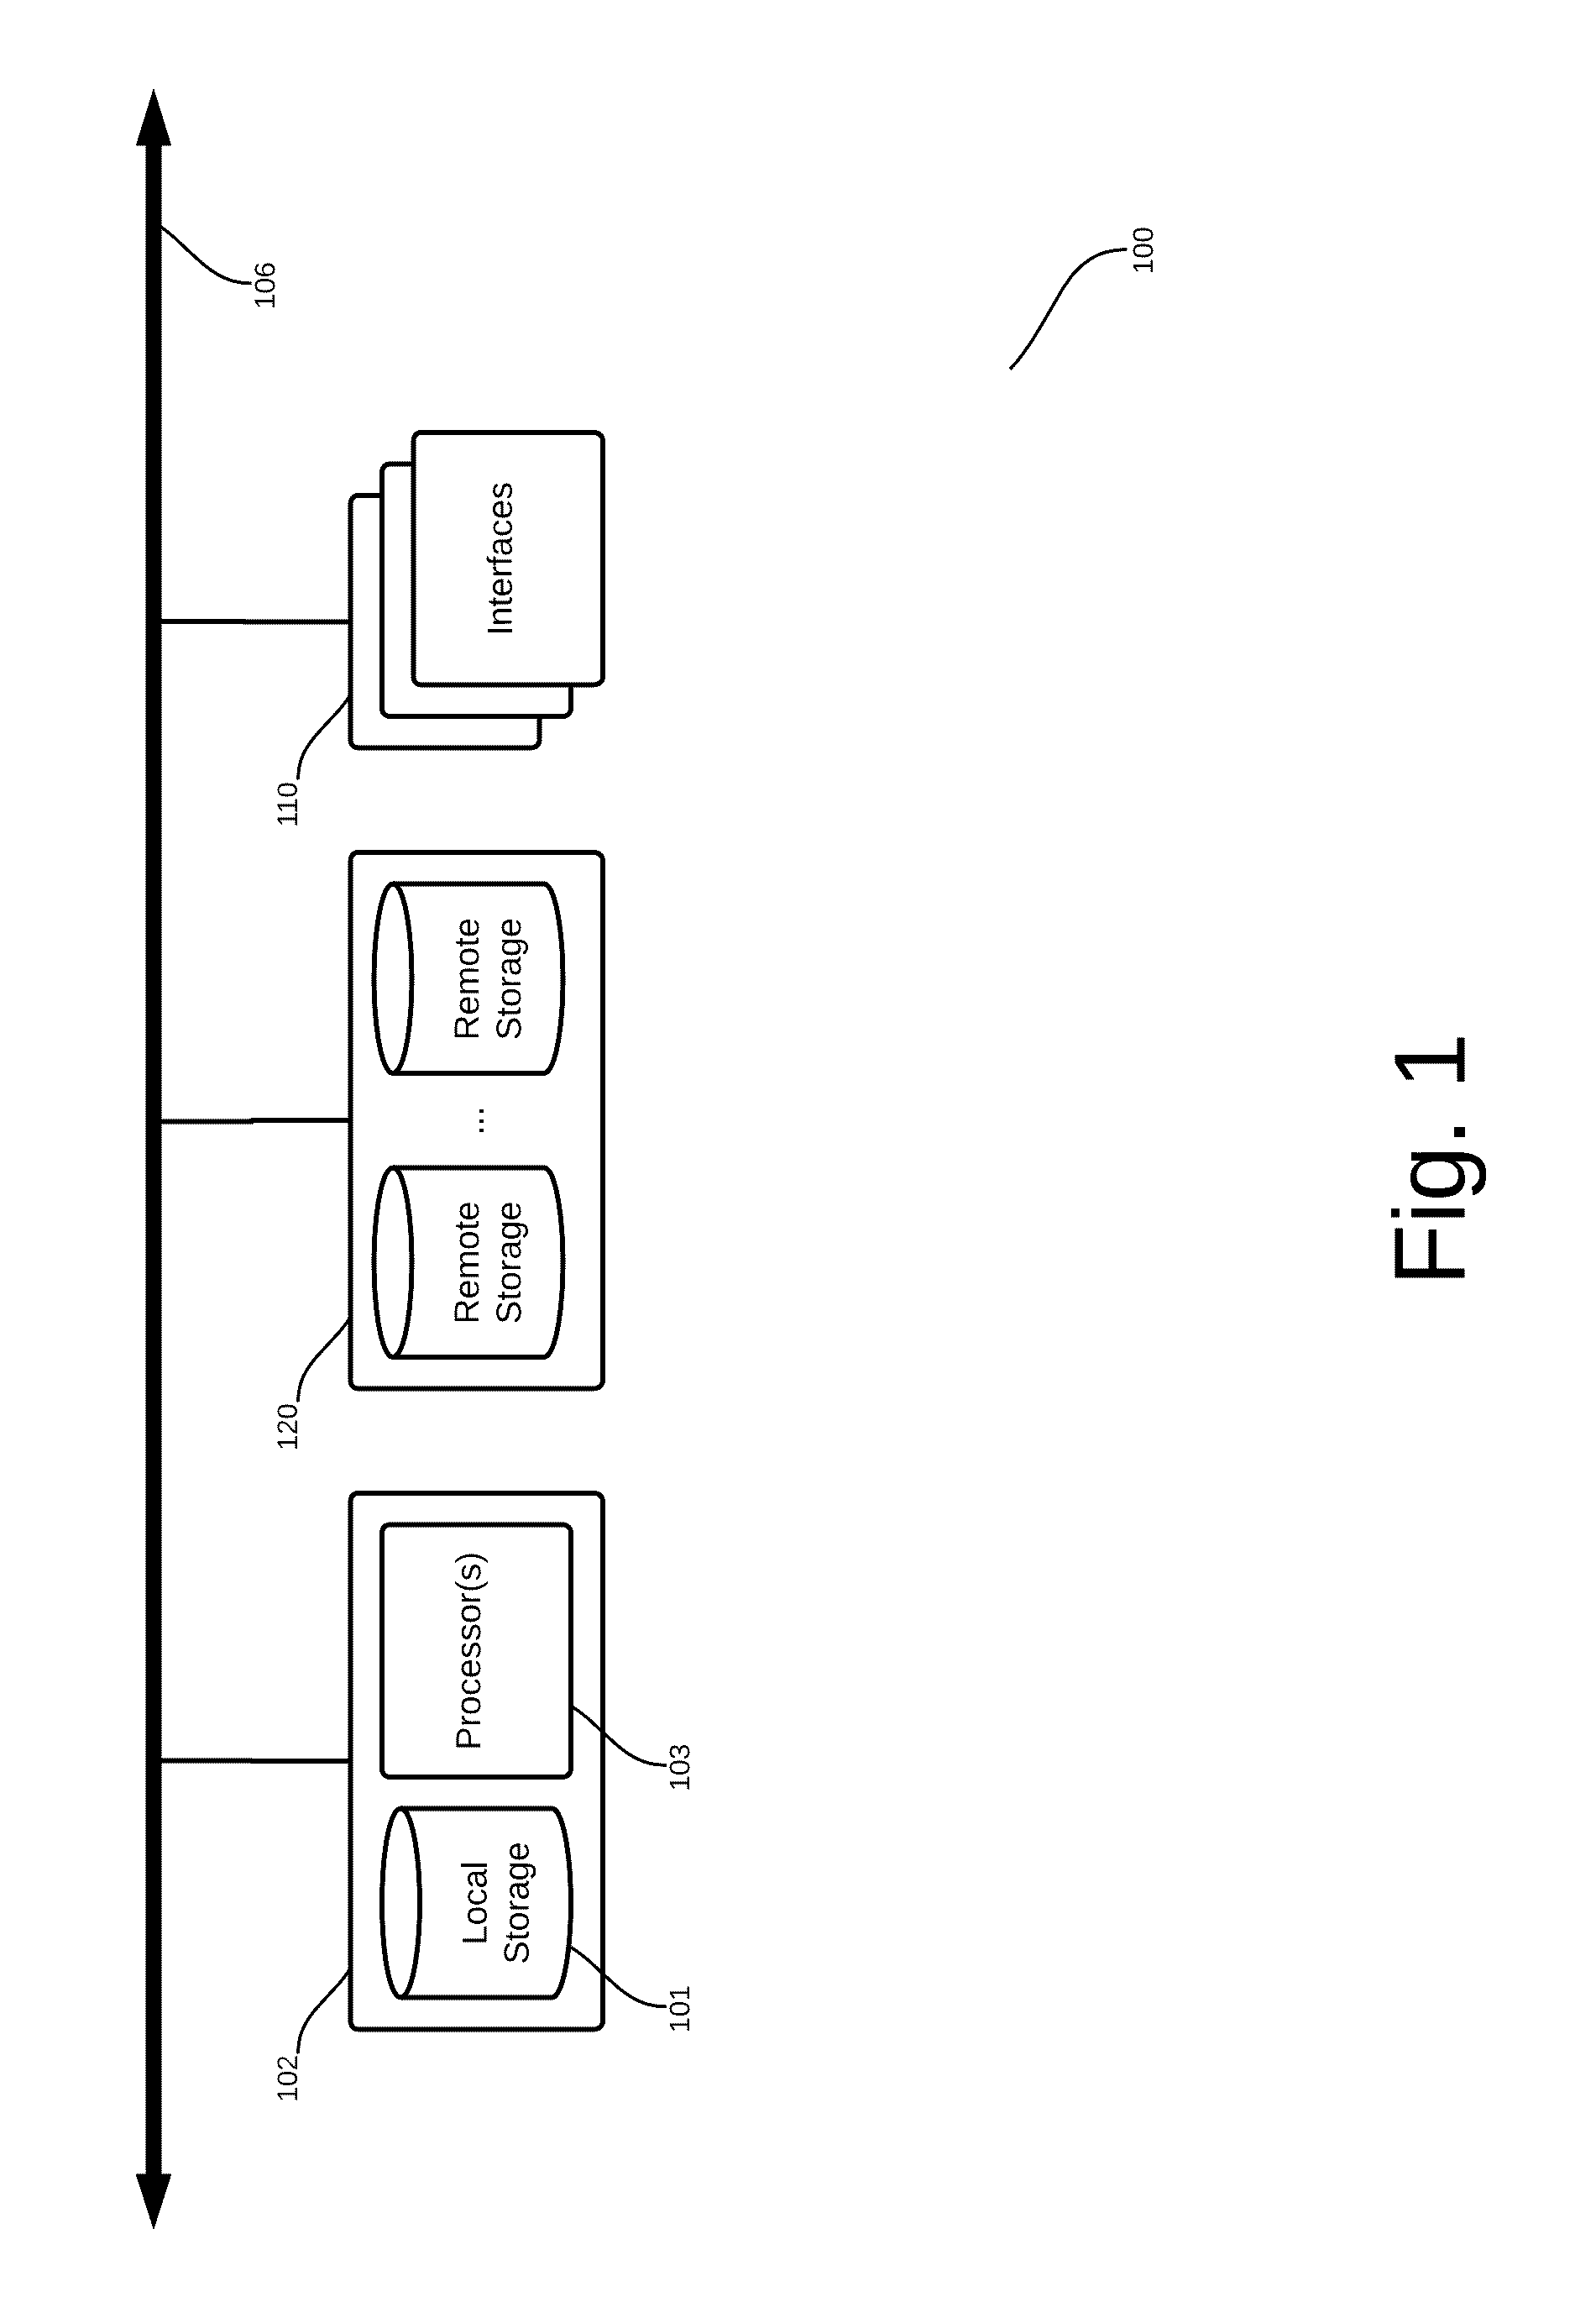 System and method for enriched multilayered multimedia communications using interactive elements